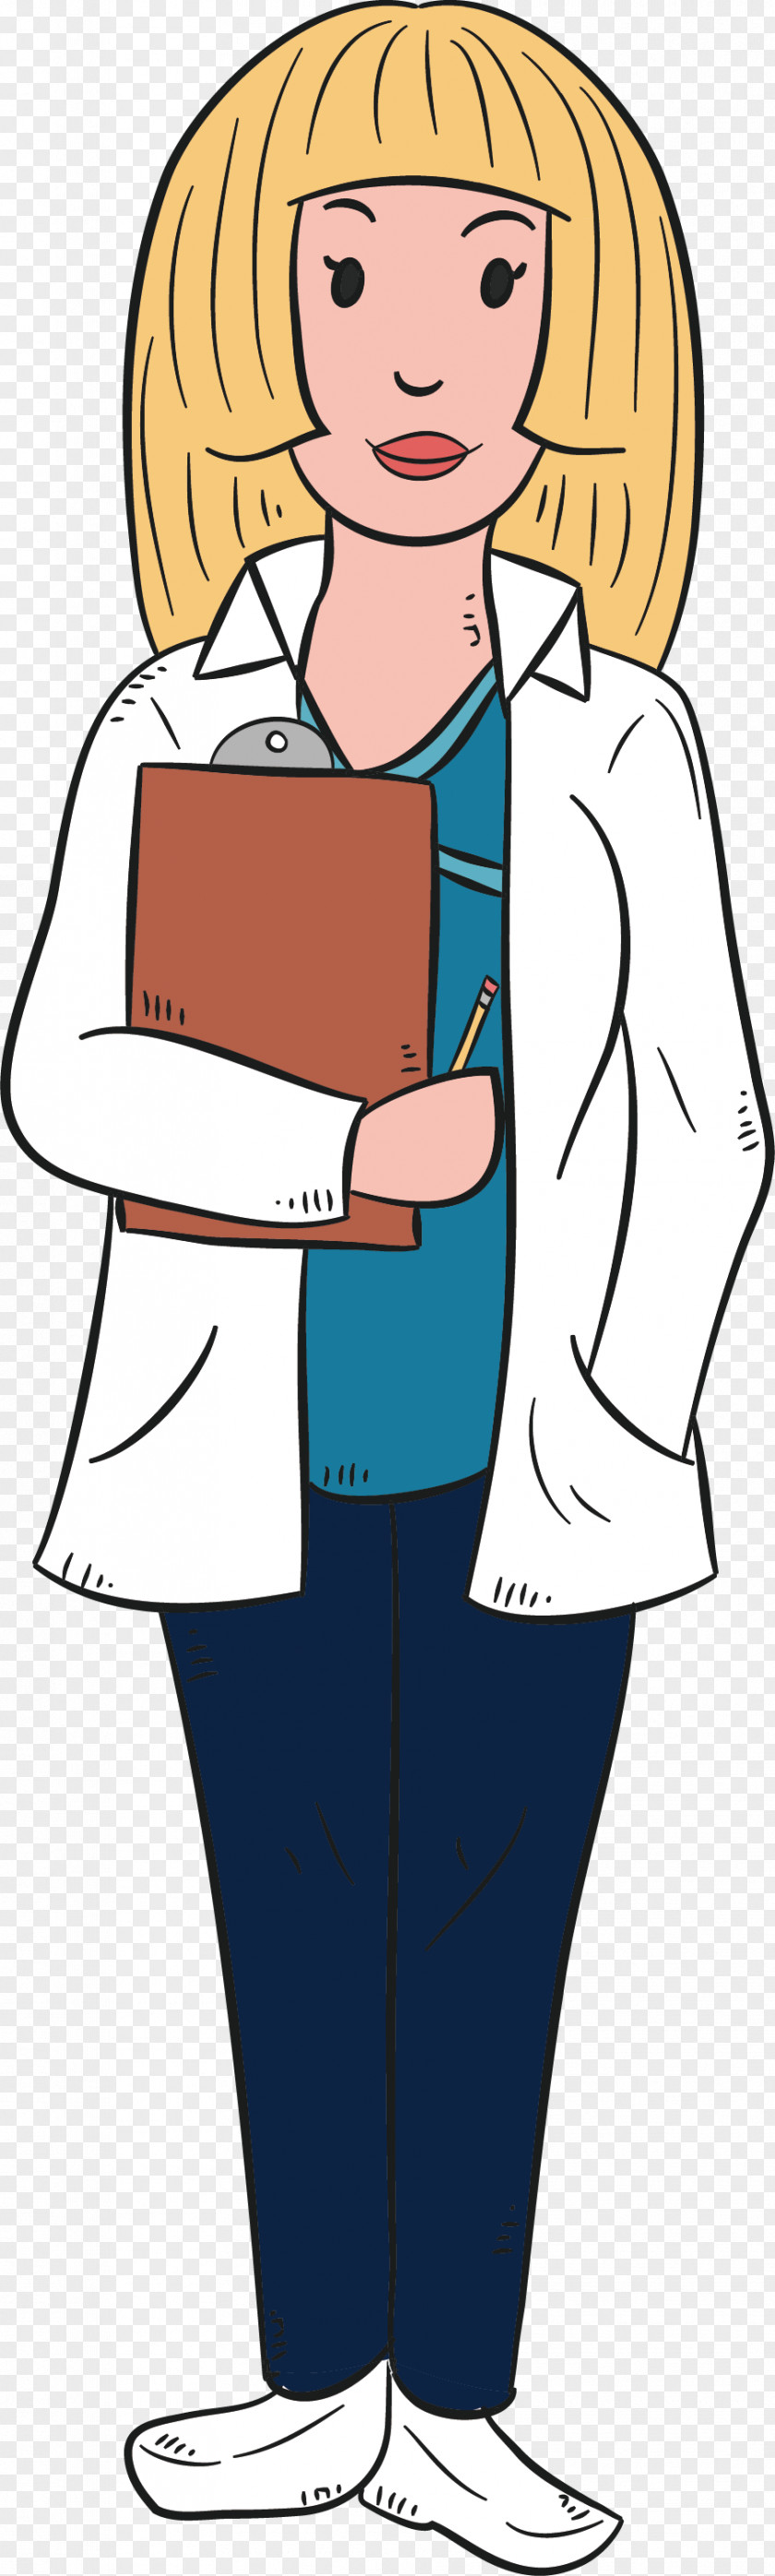 Blonde Hair Doctor Blond Physician Clip Art PNG